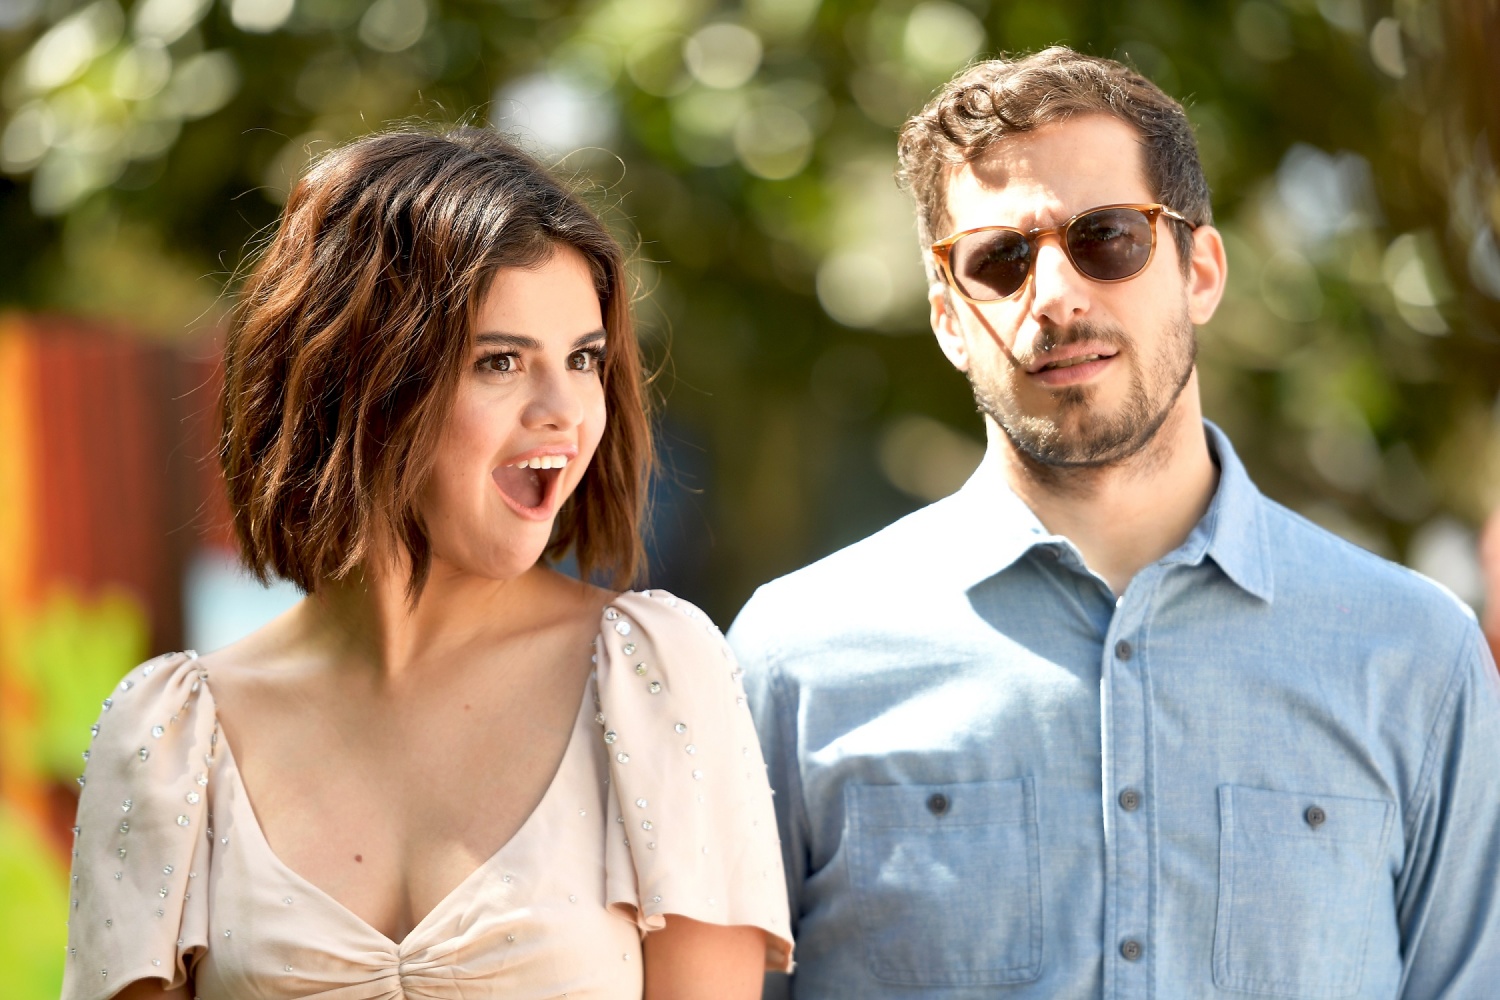  Selena Gomez (L) and Andy Samberg attend the photo call for Sony Pictures' "Hotel Transylvania 3: Summer Vacation" at Sony Pictures Studios on April 11, 2018 in Culver City, California. 